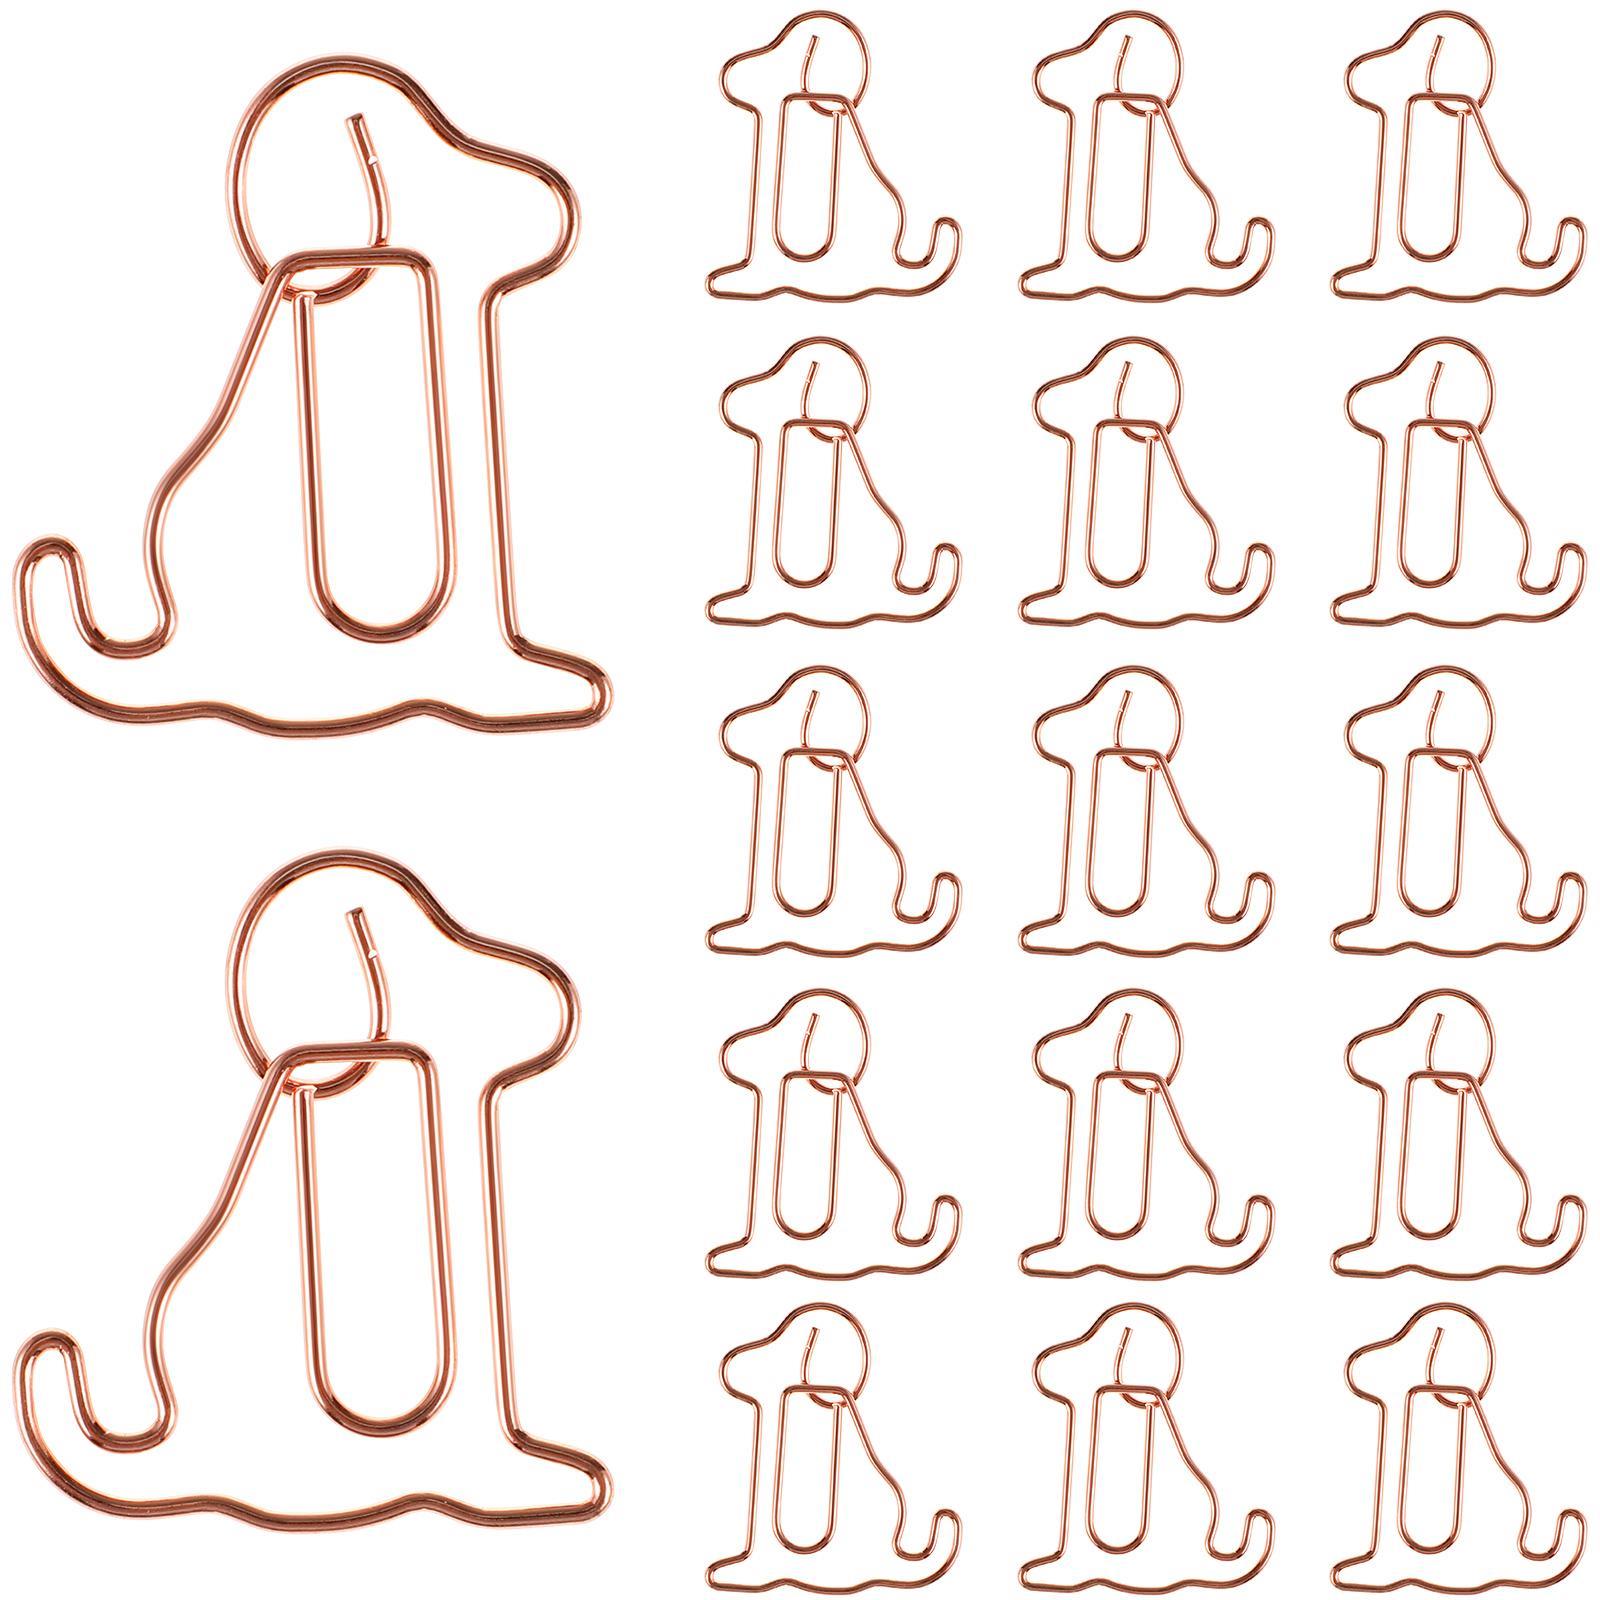 School Supplies Animal Shaped Paper Clips Notebook Binder Creative Paper Clips Paperclips Cat Paper Clip Office 25 Pcs